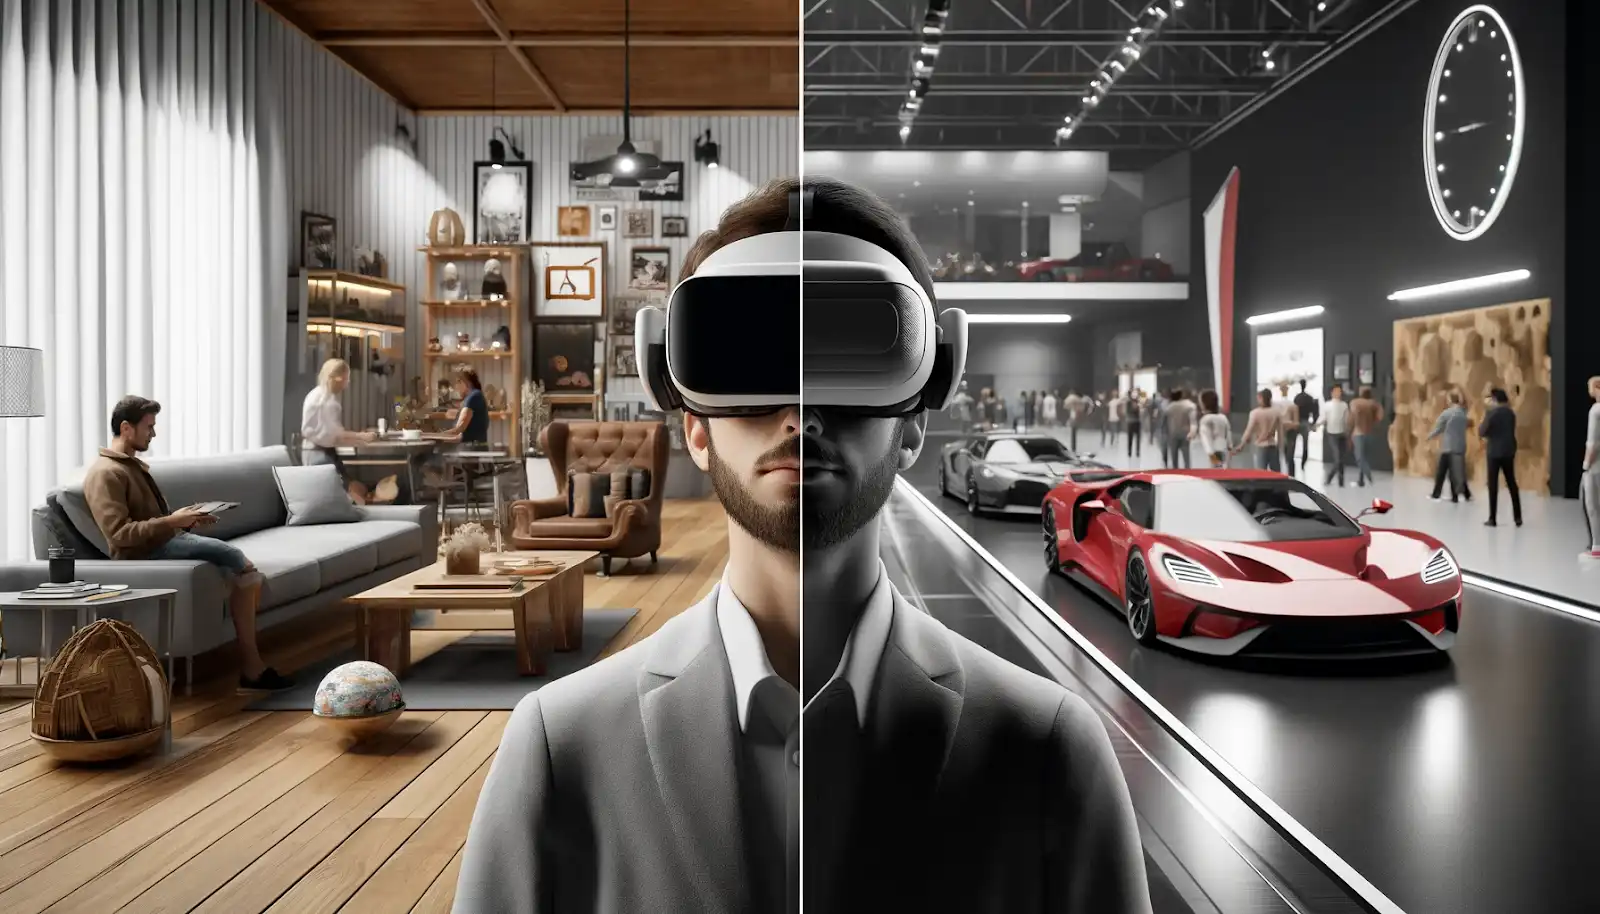 A man wearing a VR headset in a cozy home setup on one side, and the same man in an auto expo with fancy cars on display and people checking them out on the other side.